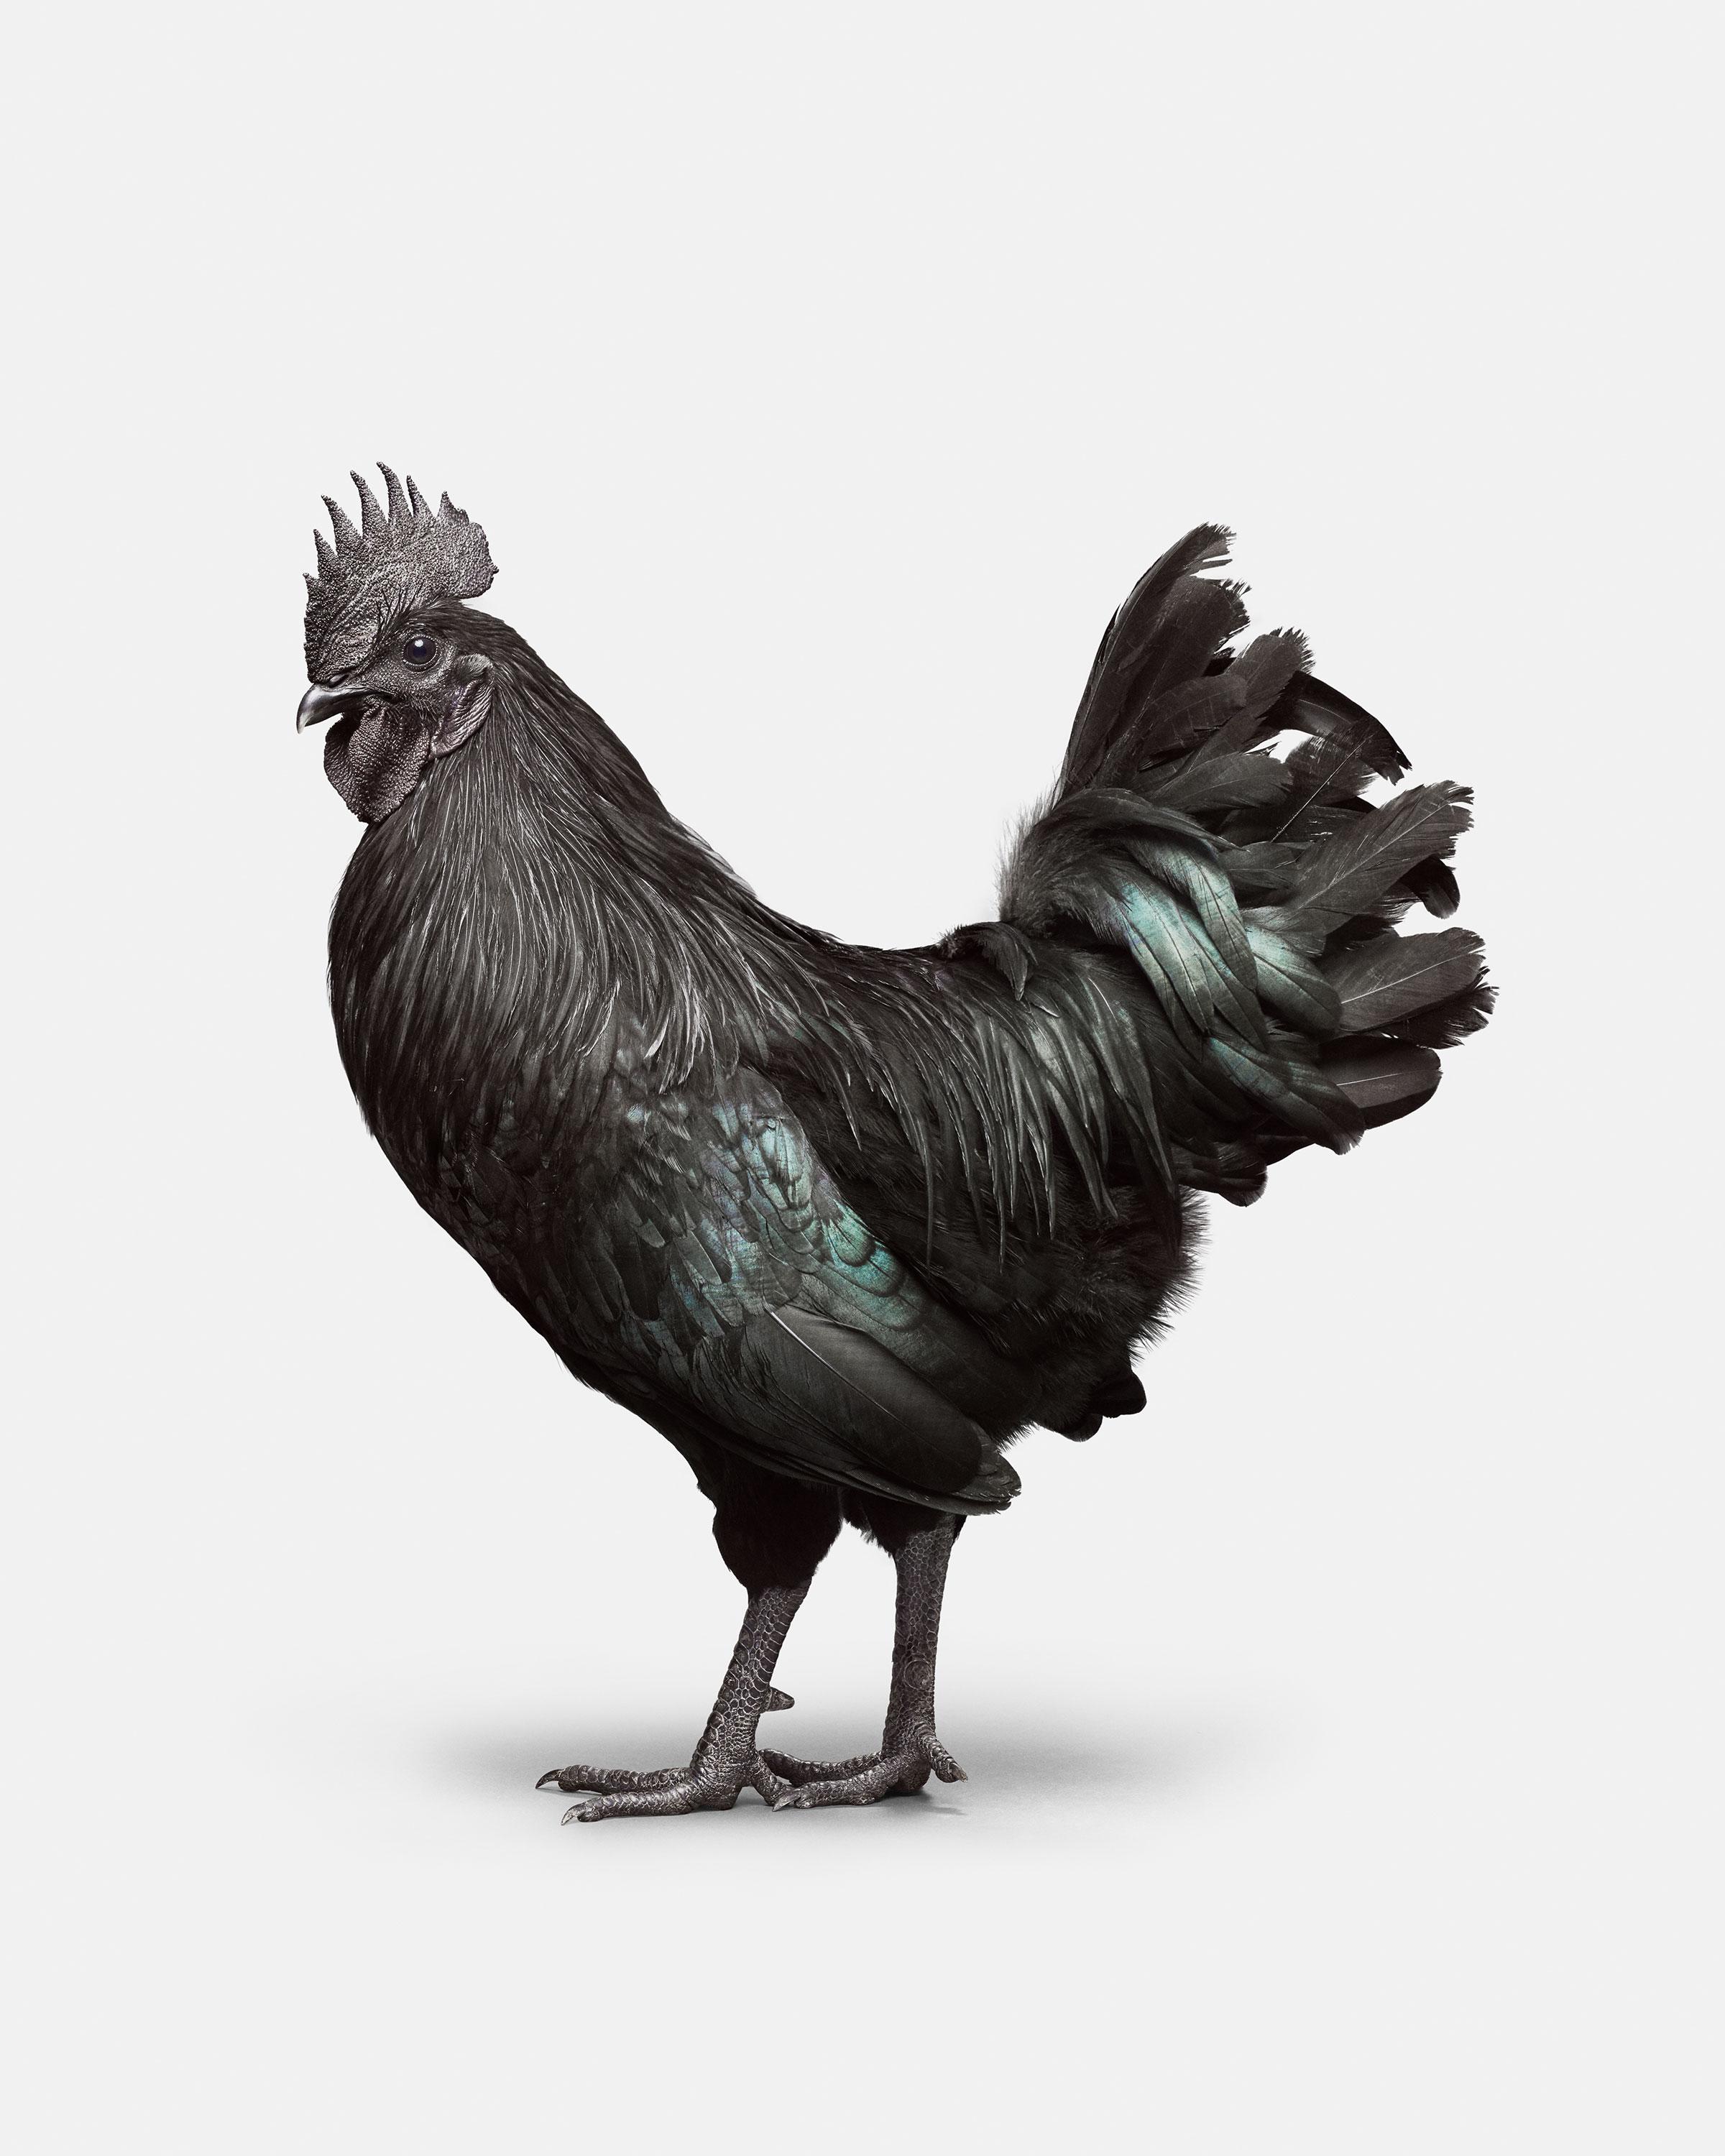 Randal Ford Color Photograph - Ayam Cemani Rooster No. 2 (37.5" x 30")